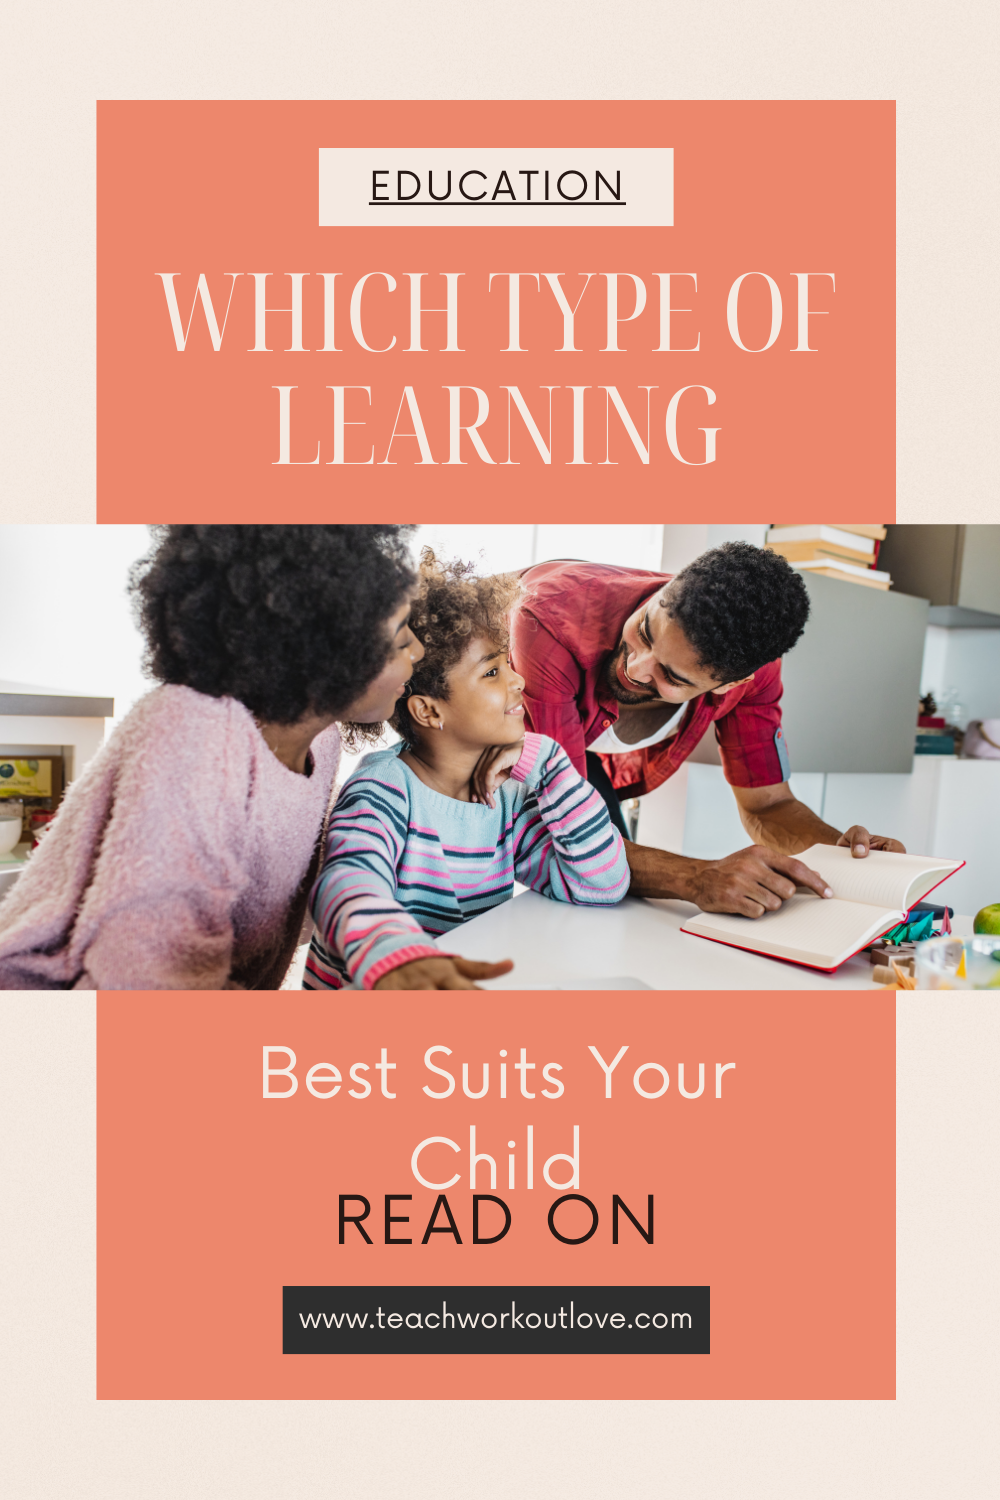 Not all children learn either at the same pace nor in the same way. Finding the right type of learning style to match your child’s needs gives them a head start.